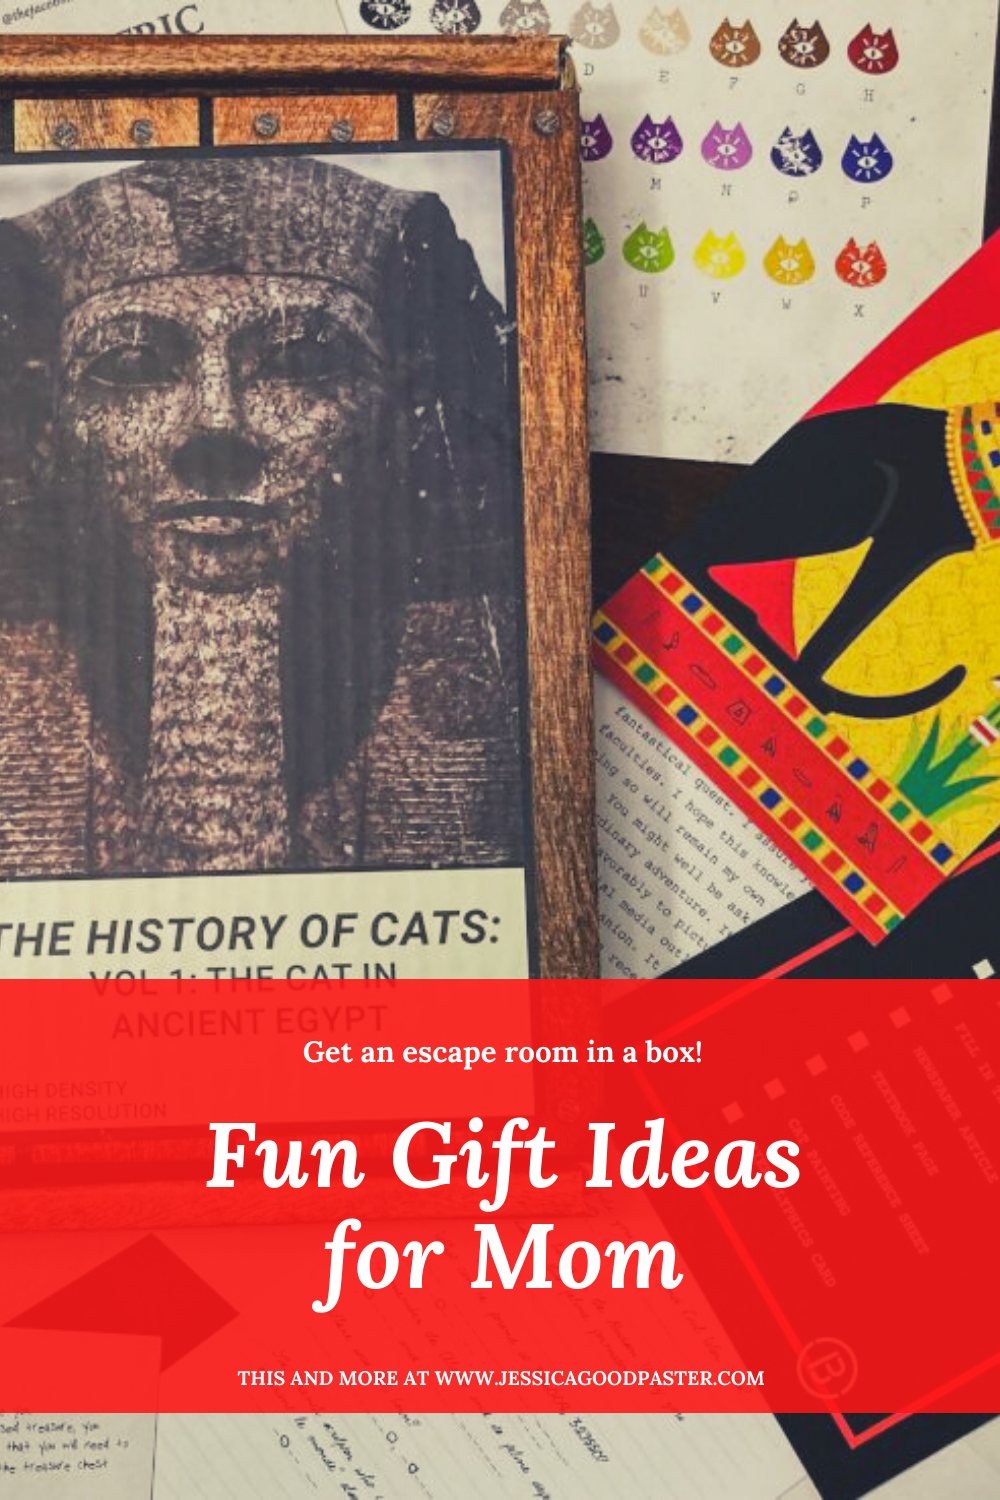 Fun Gift Ideas for Mom | Find the perfect Christmas gift for your mom, grandmother, or wife with this list of unique gift ideas! Some are meaningful, fun, useful, or edible. Also includes the best subscription box ideas. Even if your mom has everything, you'll find the present that is just right! #christmasgifts #giftideas #giftideasforher #giftideasformom #uniquegifts #fungiftideas #thoughtfulgifts #christmas2020 #bestgiftideas